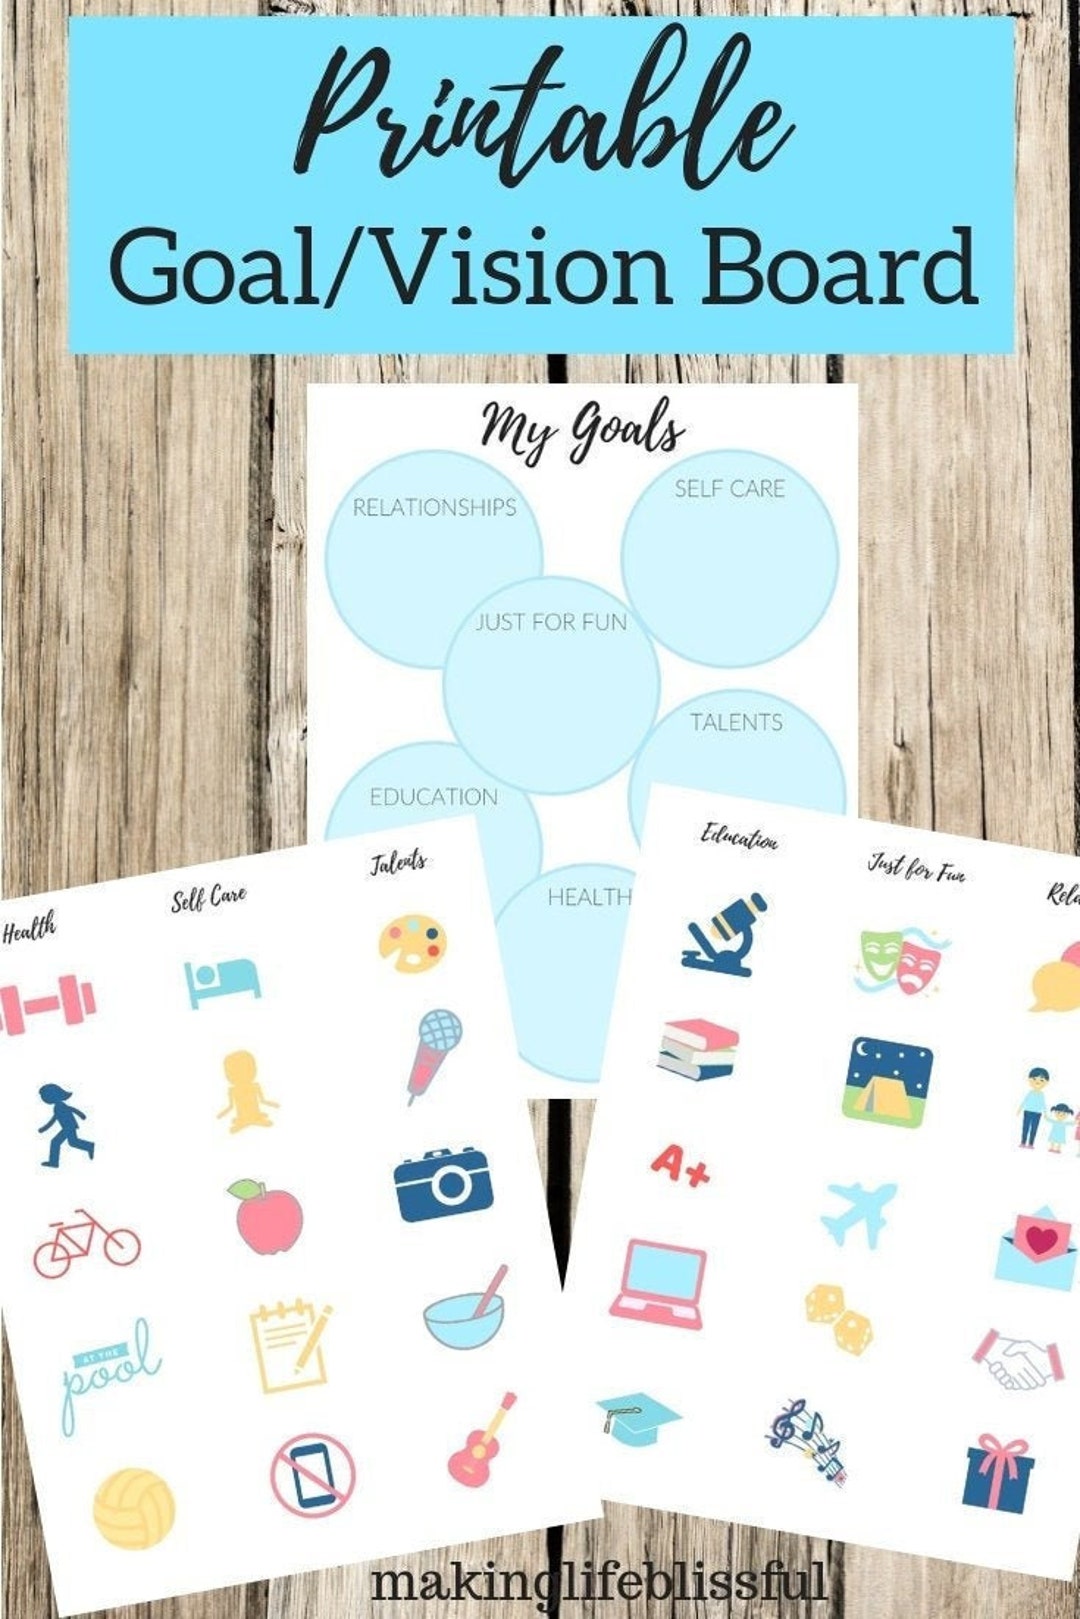 Children & Youth {LUKE 2:52} GOAL Board PRINTABLE – My Computer is My  Canvas